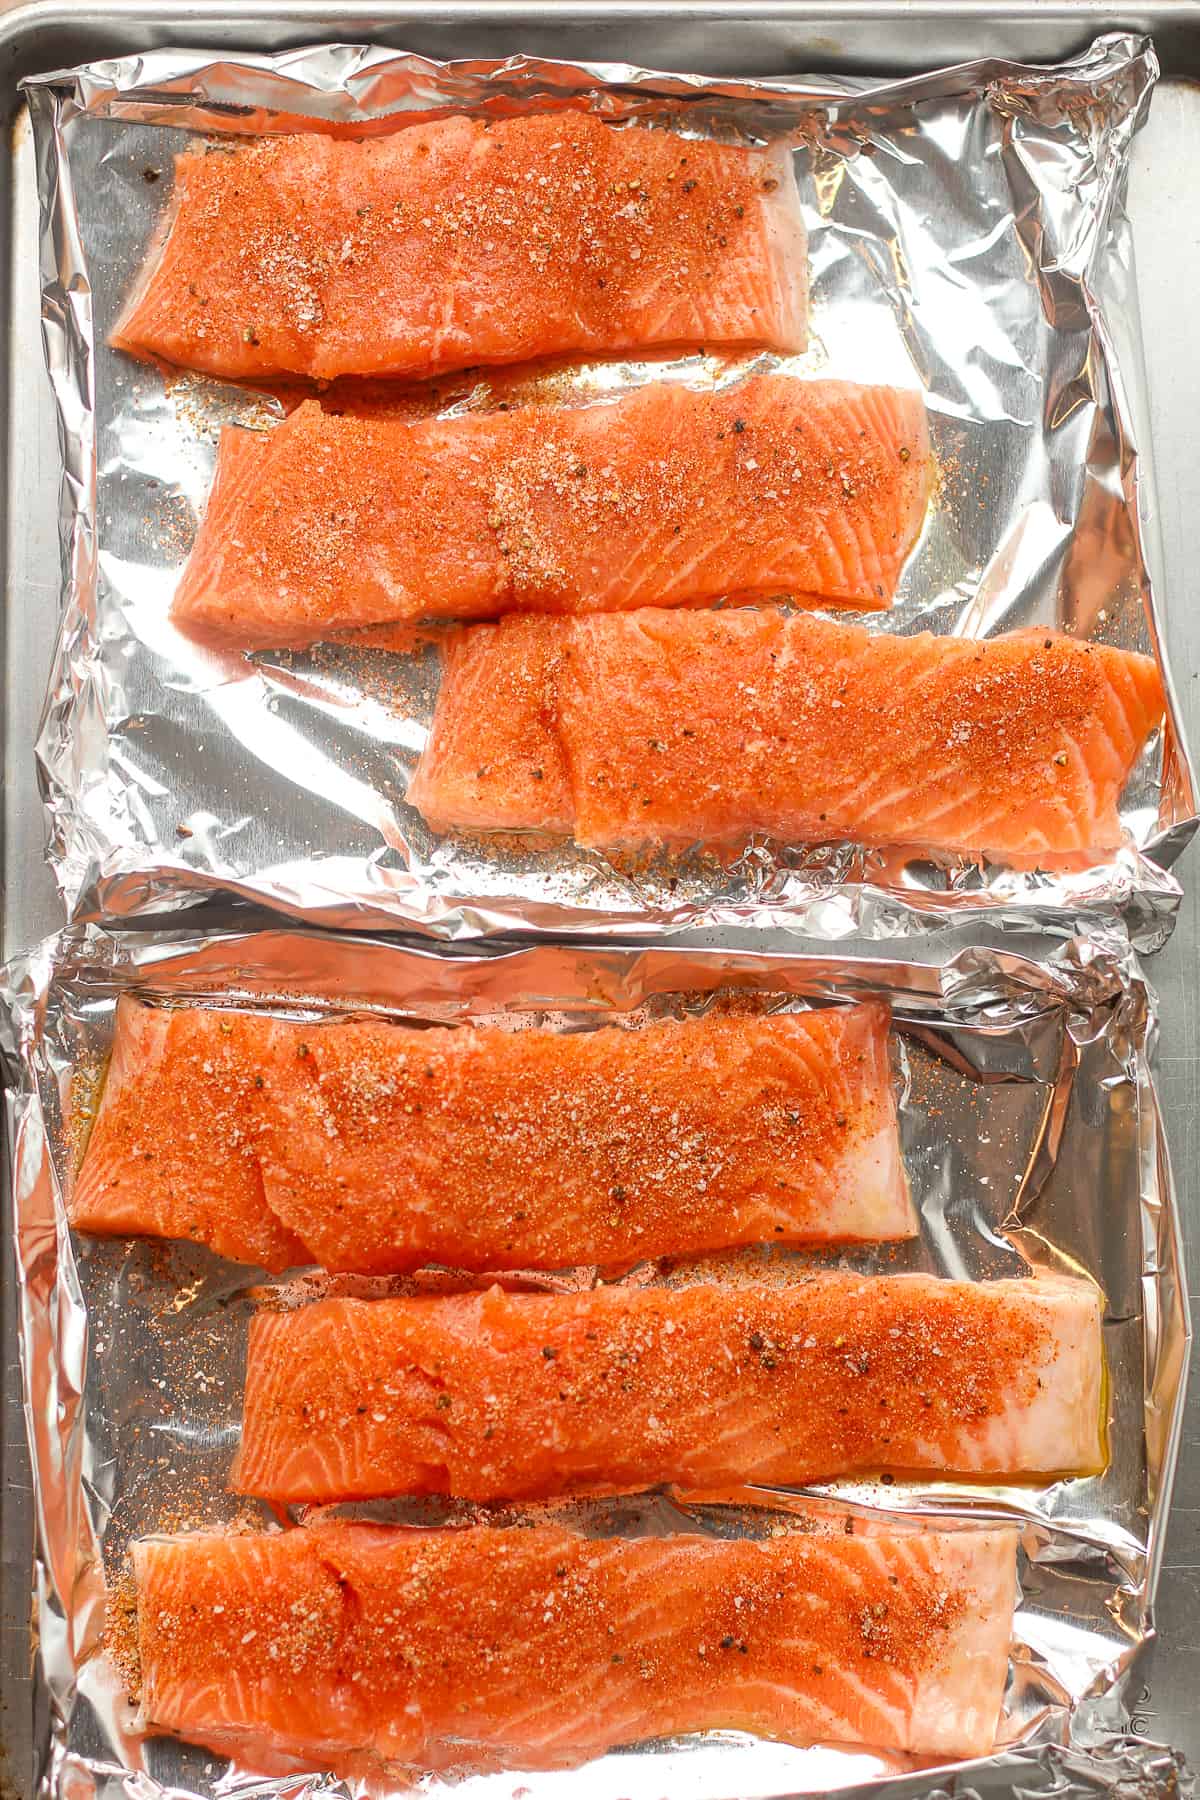 Six pieces of salmon with seasonings on top.